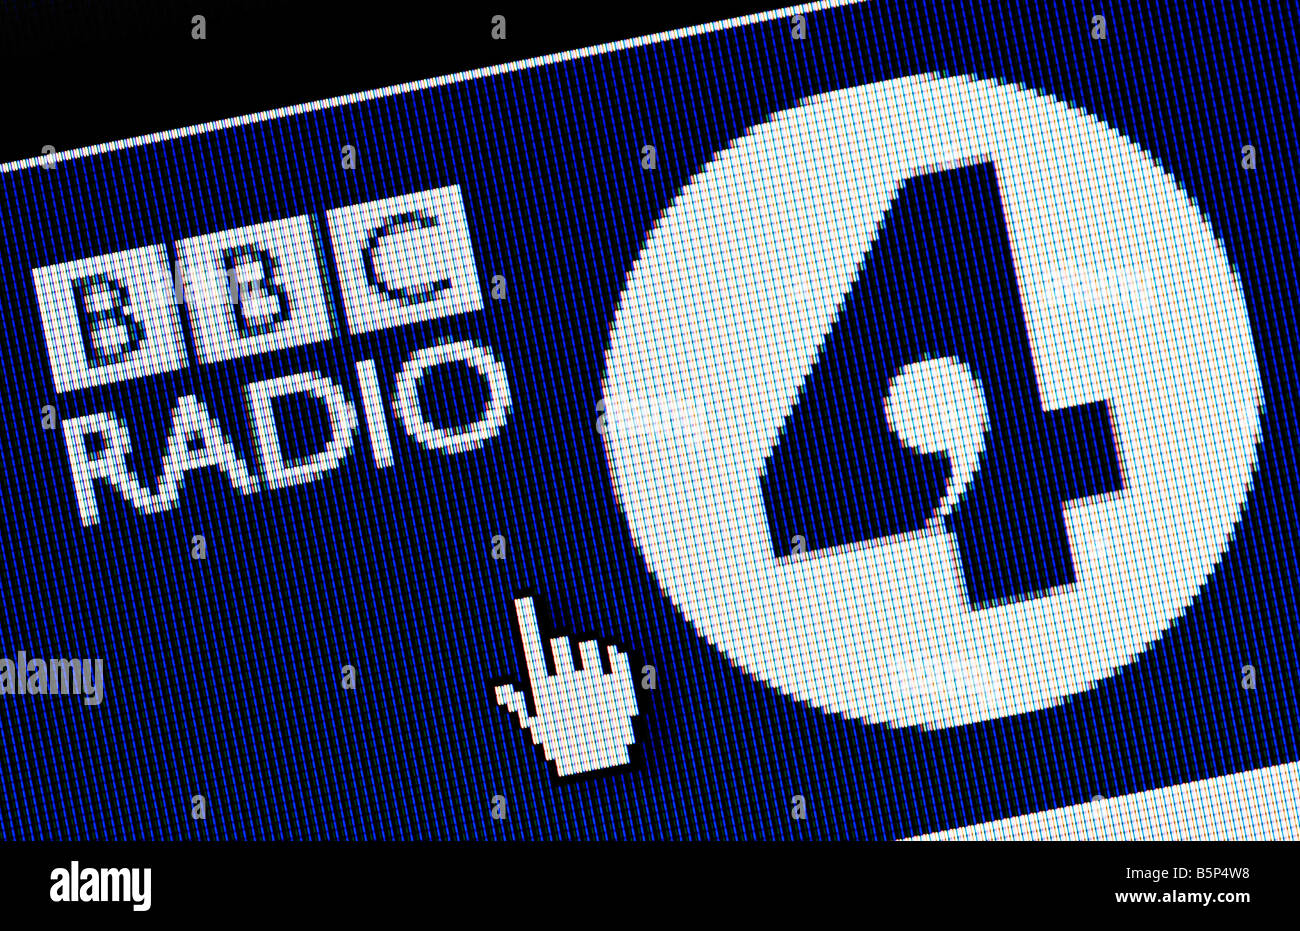 Bbc Radio 4 High Resolution Stock Photography and Images - Alamy